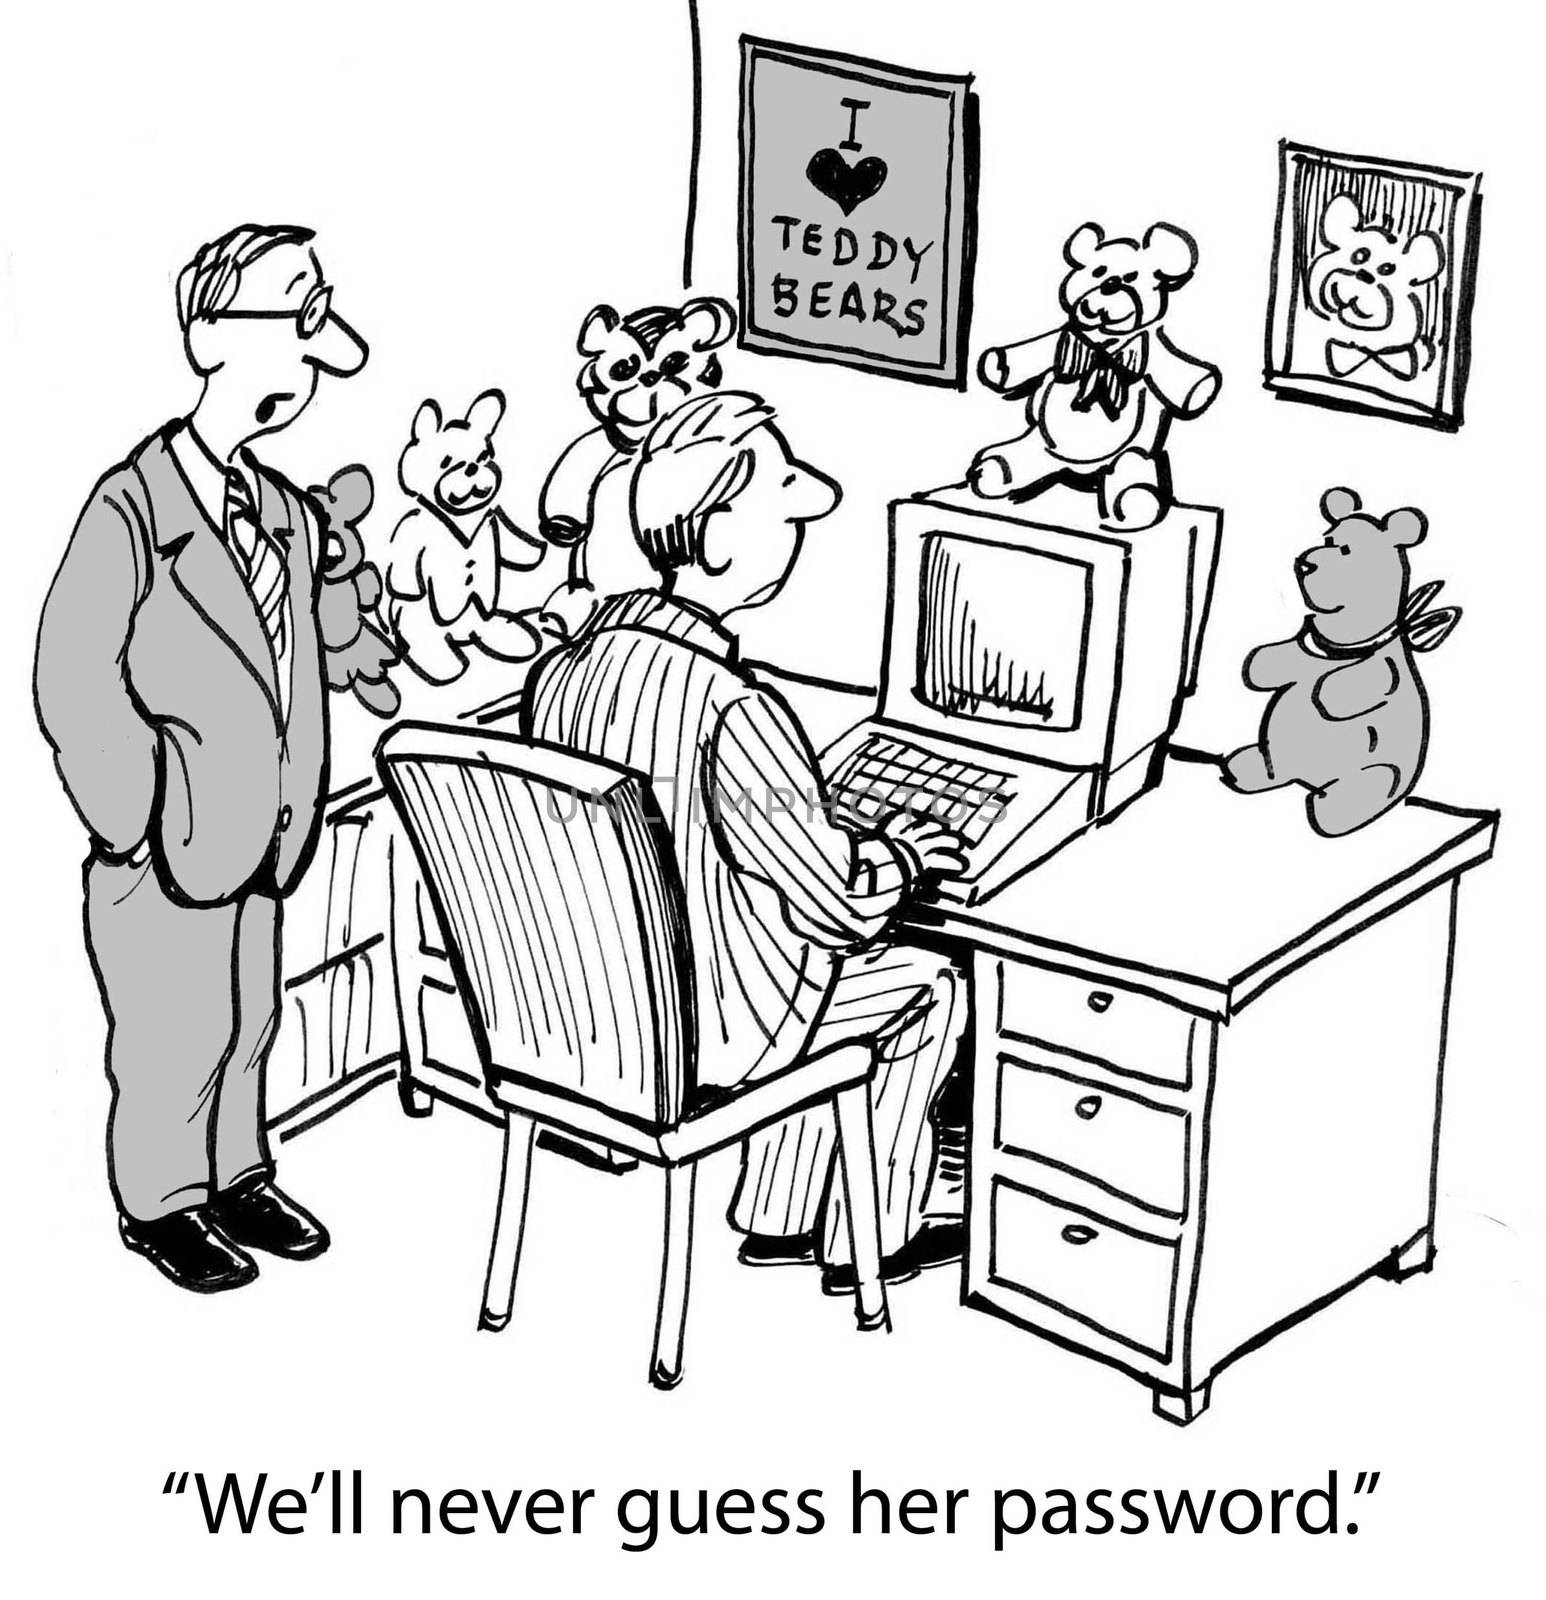 We'll never guess her password if it's a bear by andrewgenn